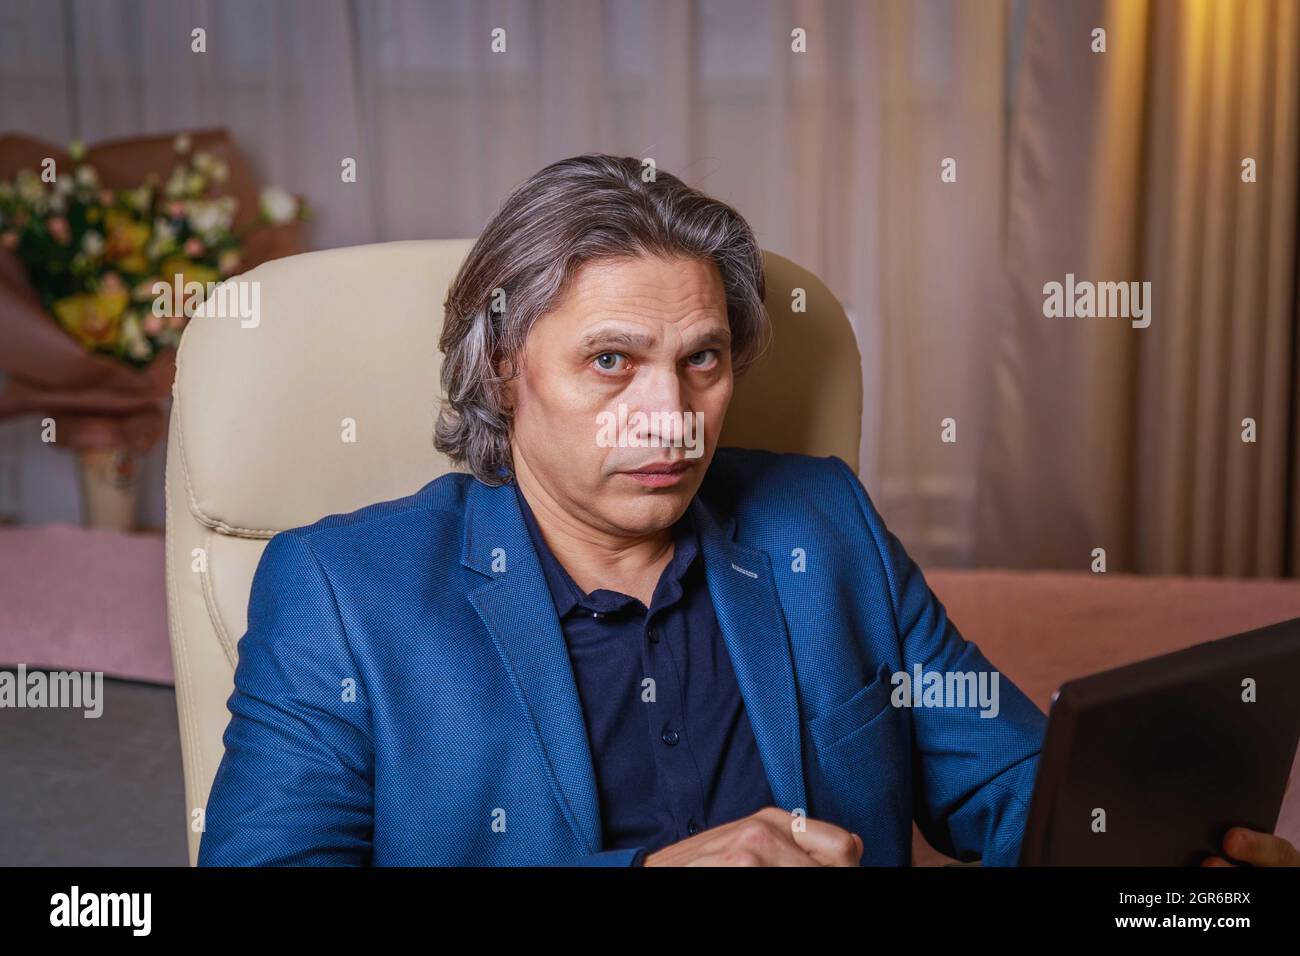 A 50-year-old Man With Long Gray Hair Works At A Computer. Works At Home, Remotely. Stock Photo